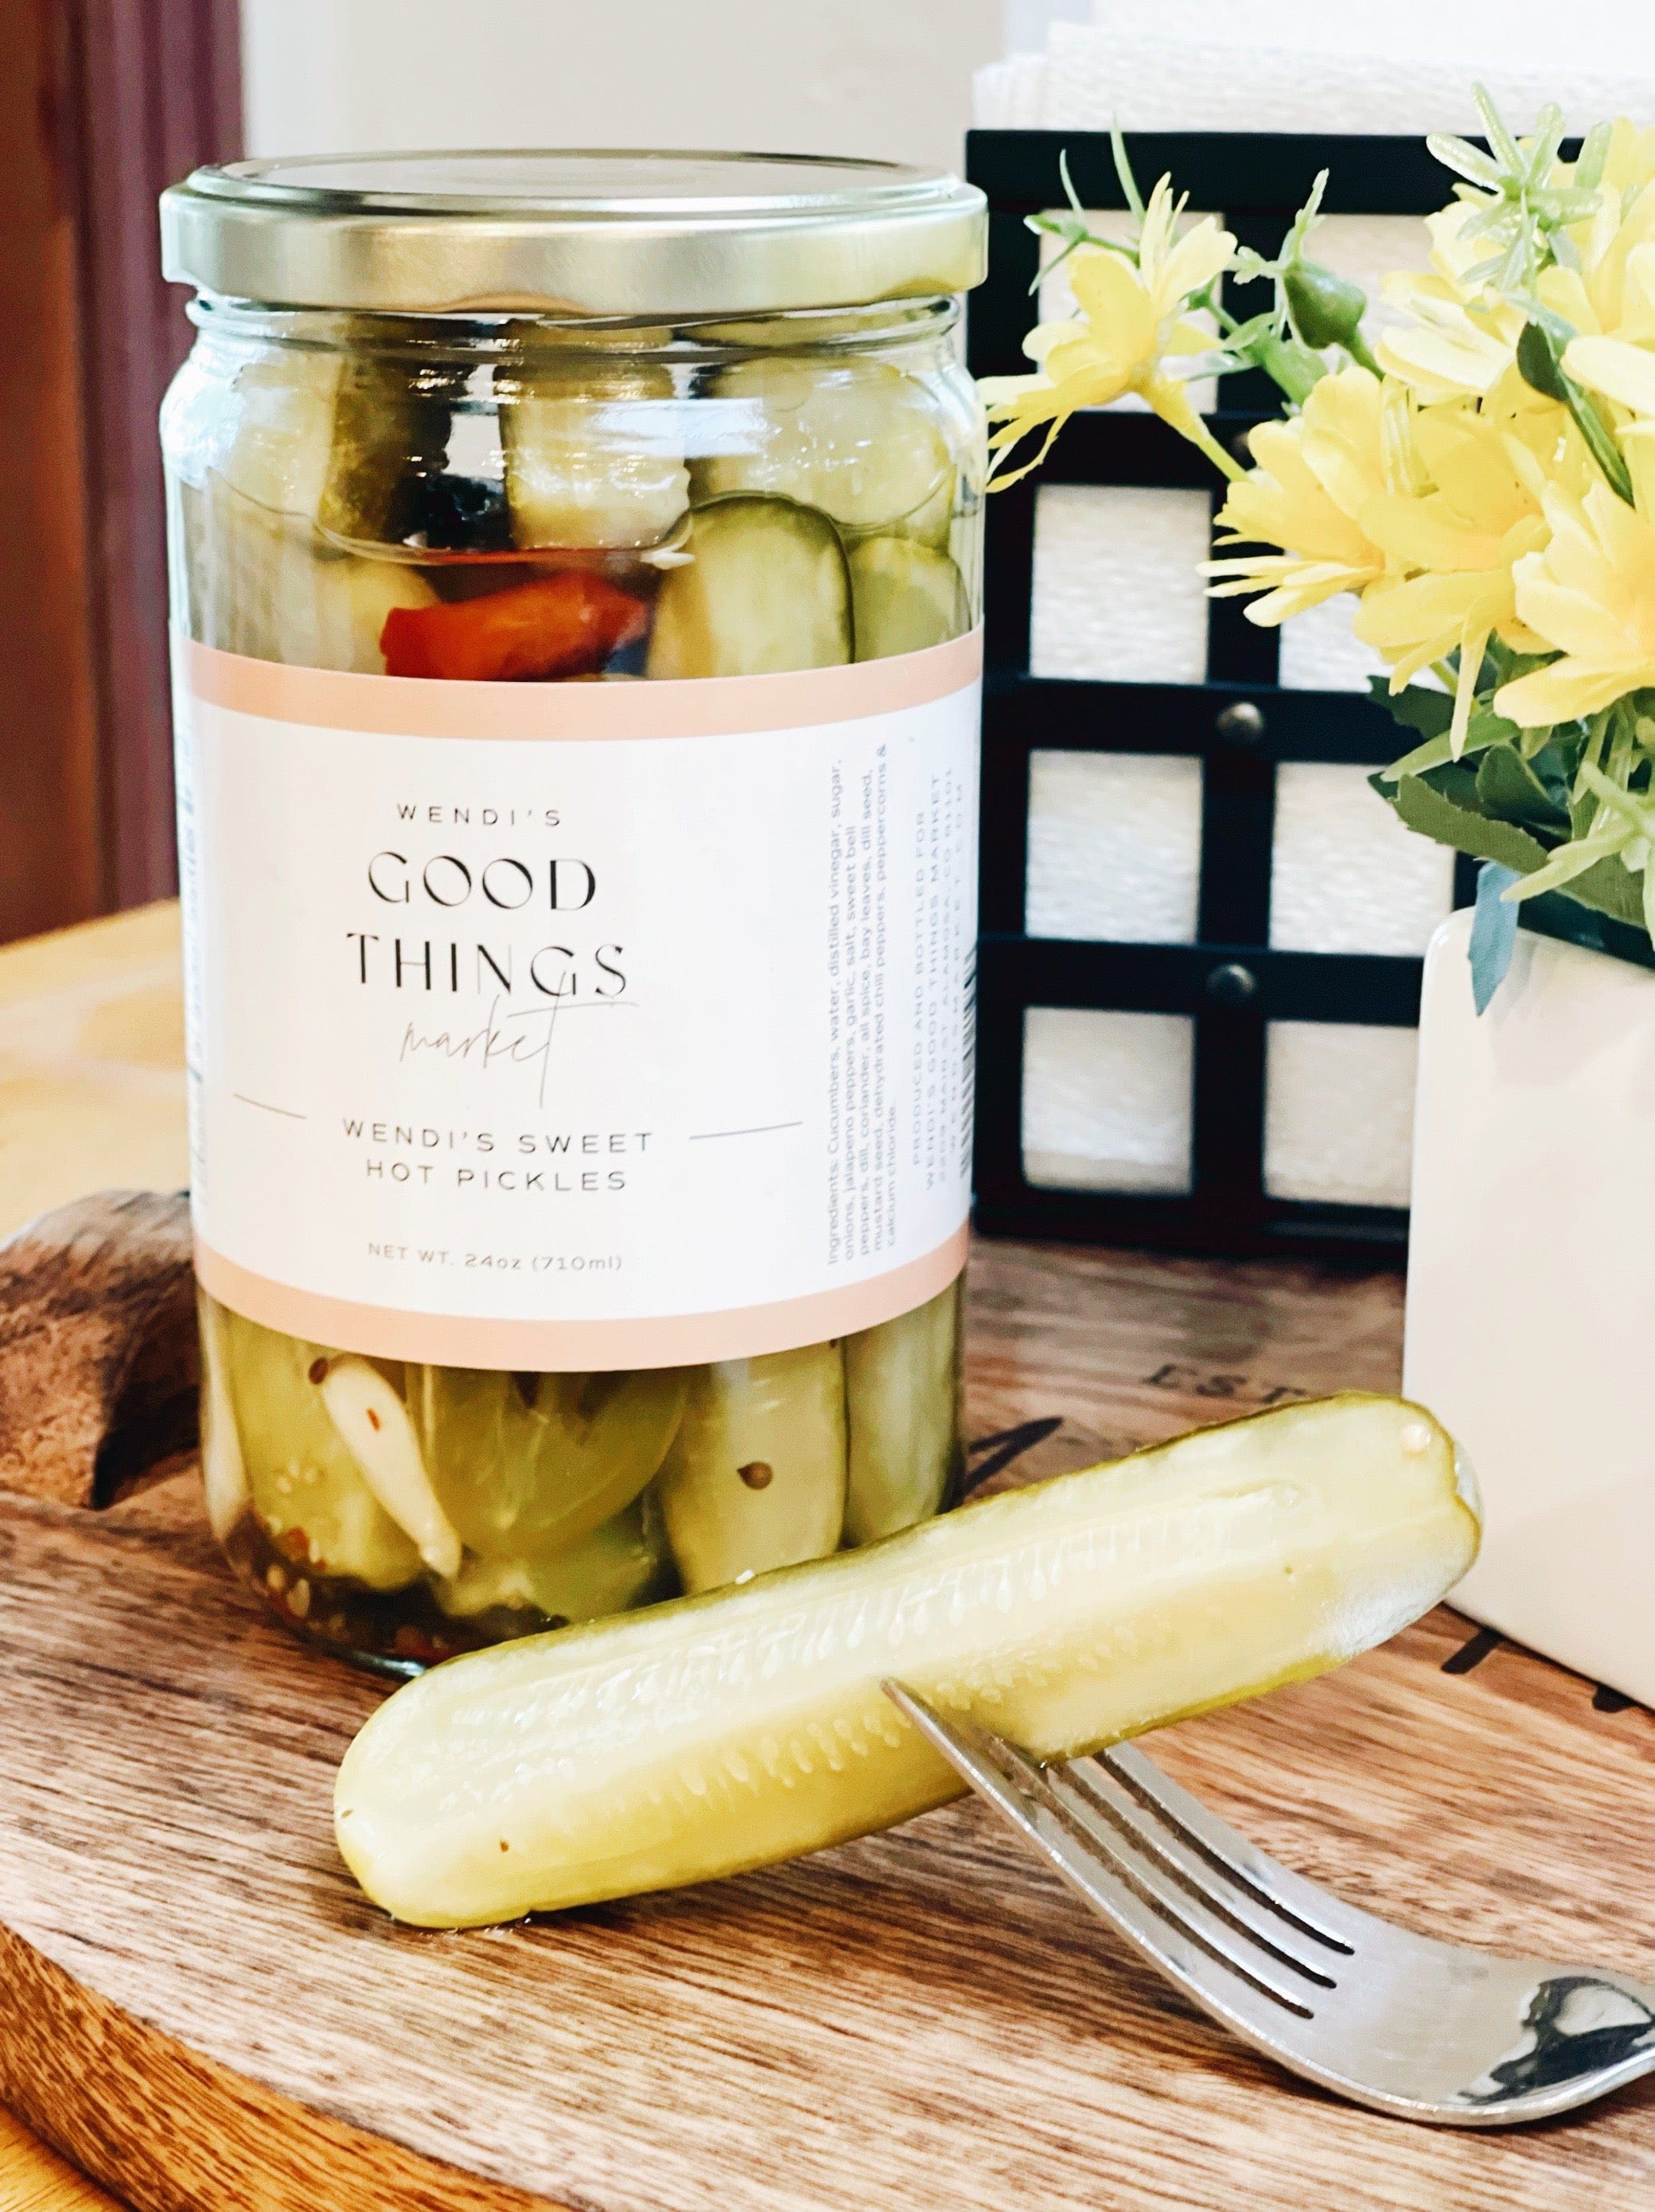 hot sweet pickles, wendi's good things market, made in Colorado